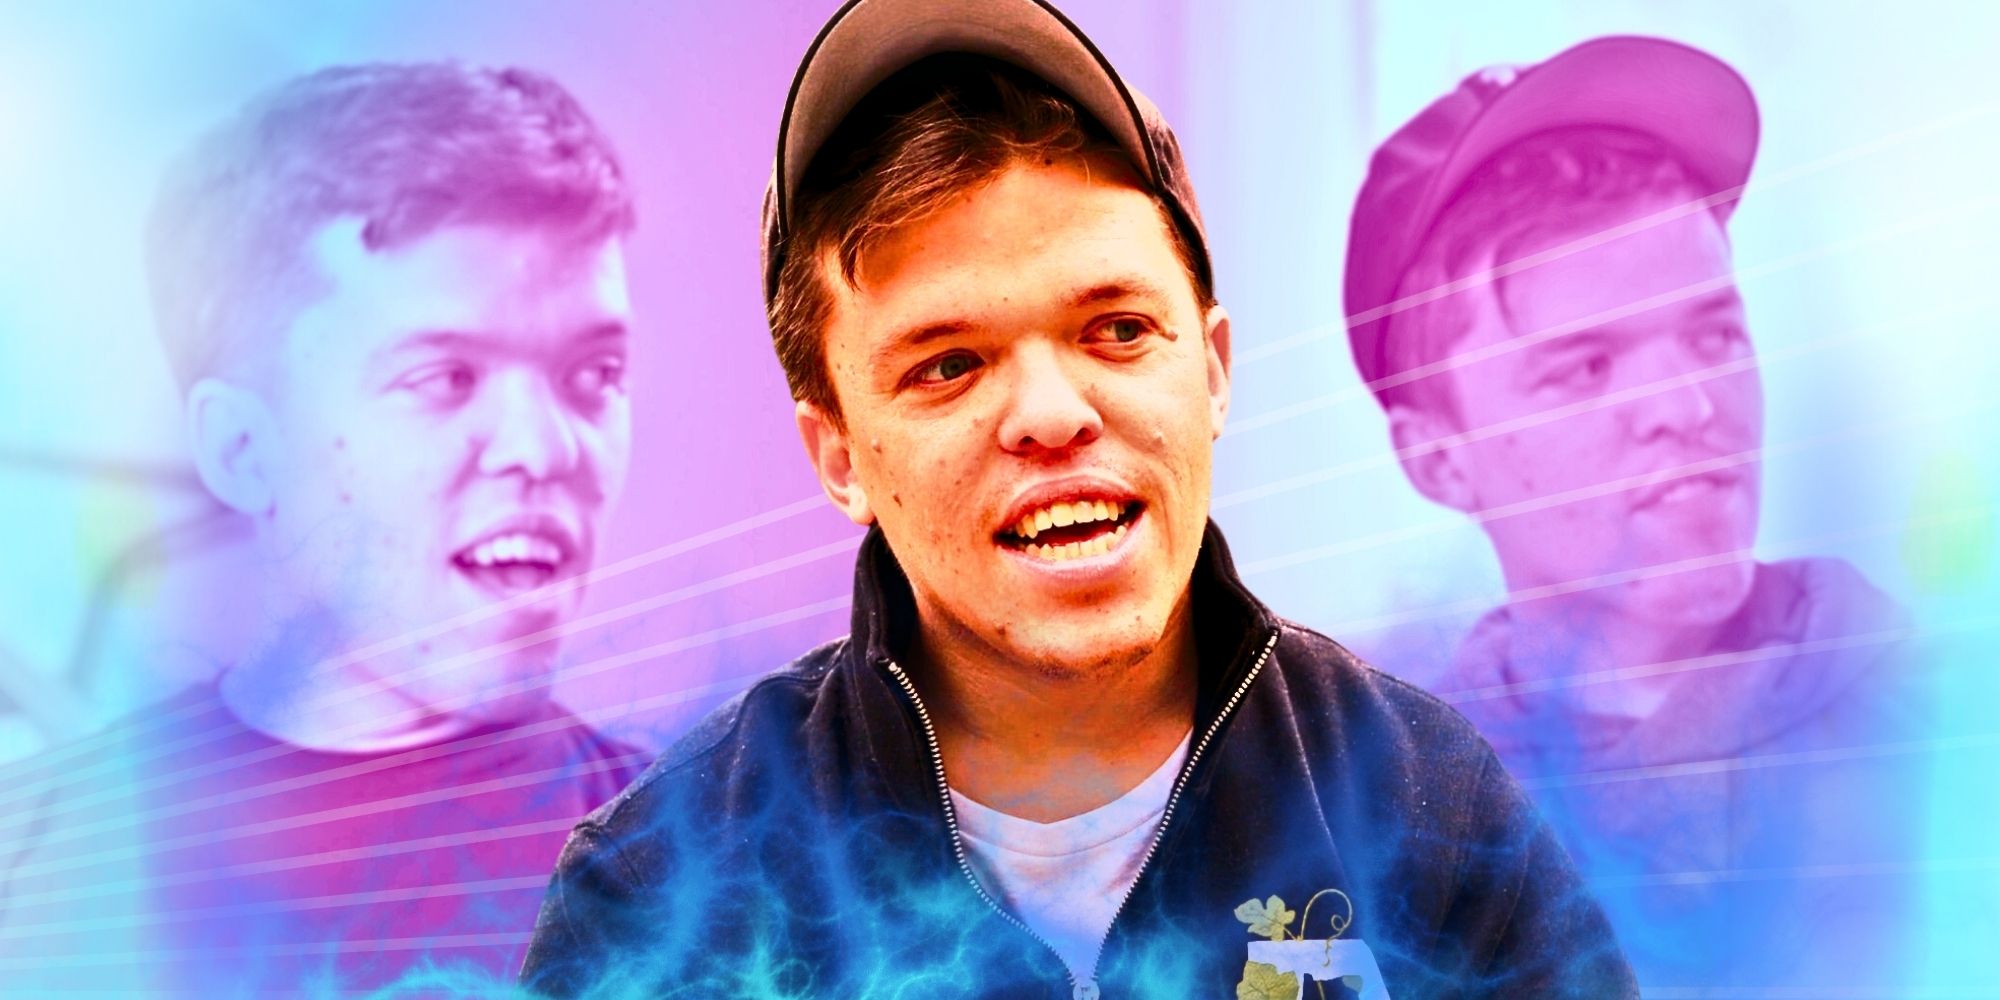 Zach Roloff Little People, Big World smiling in the center of two other photos of him speaking